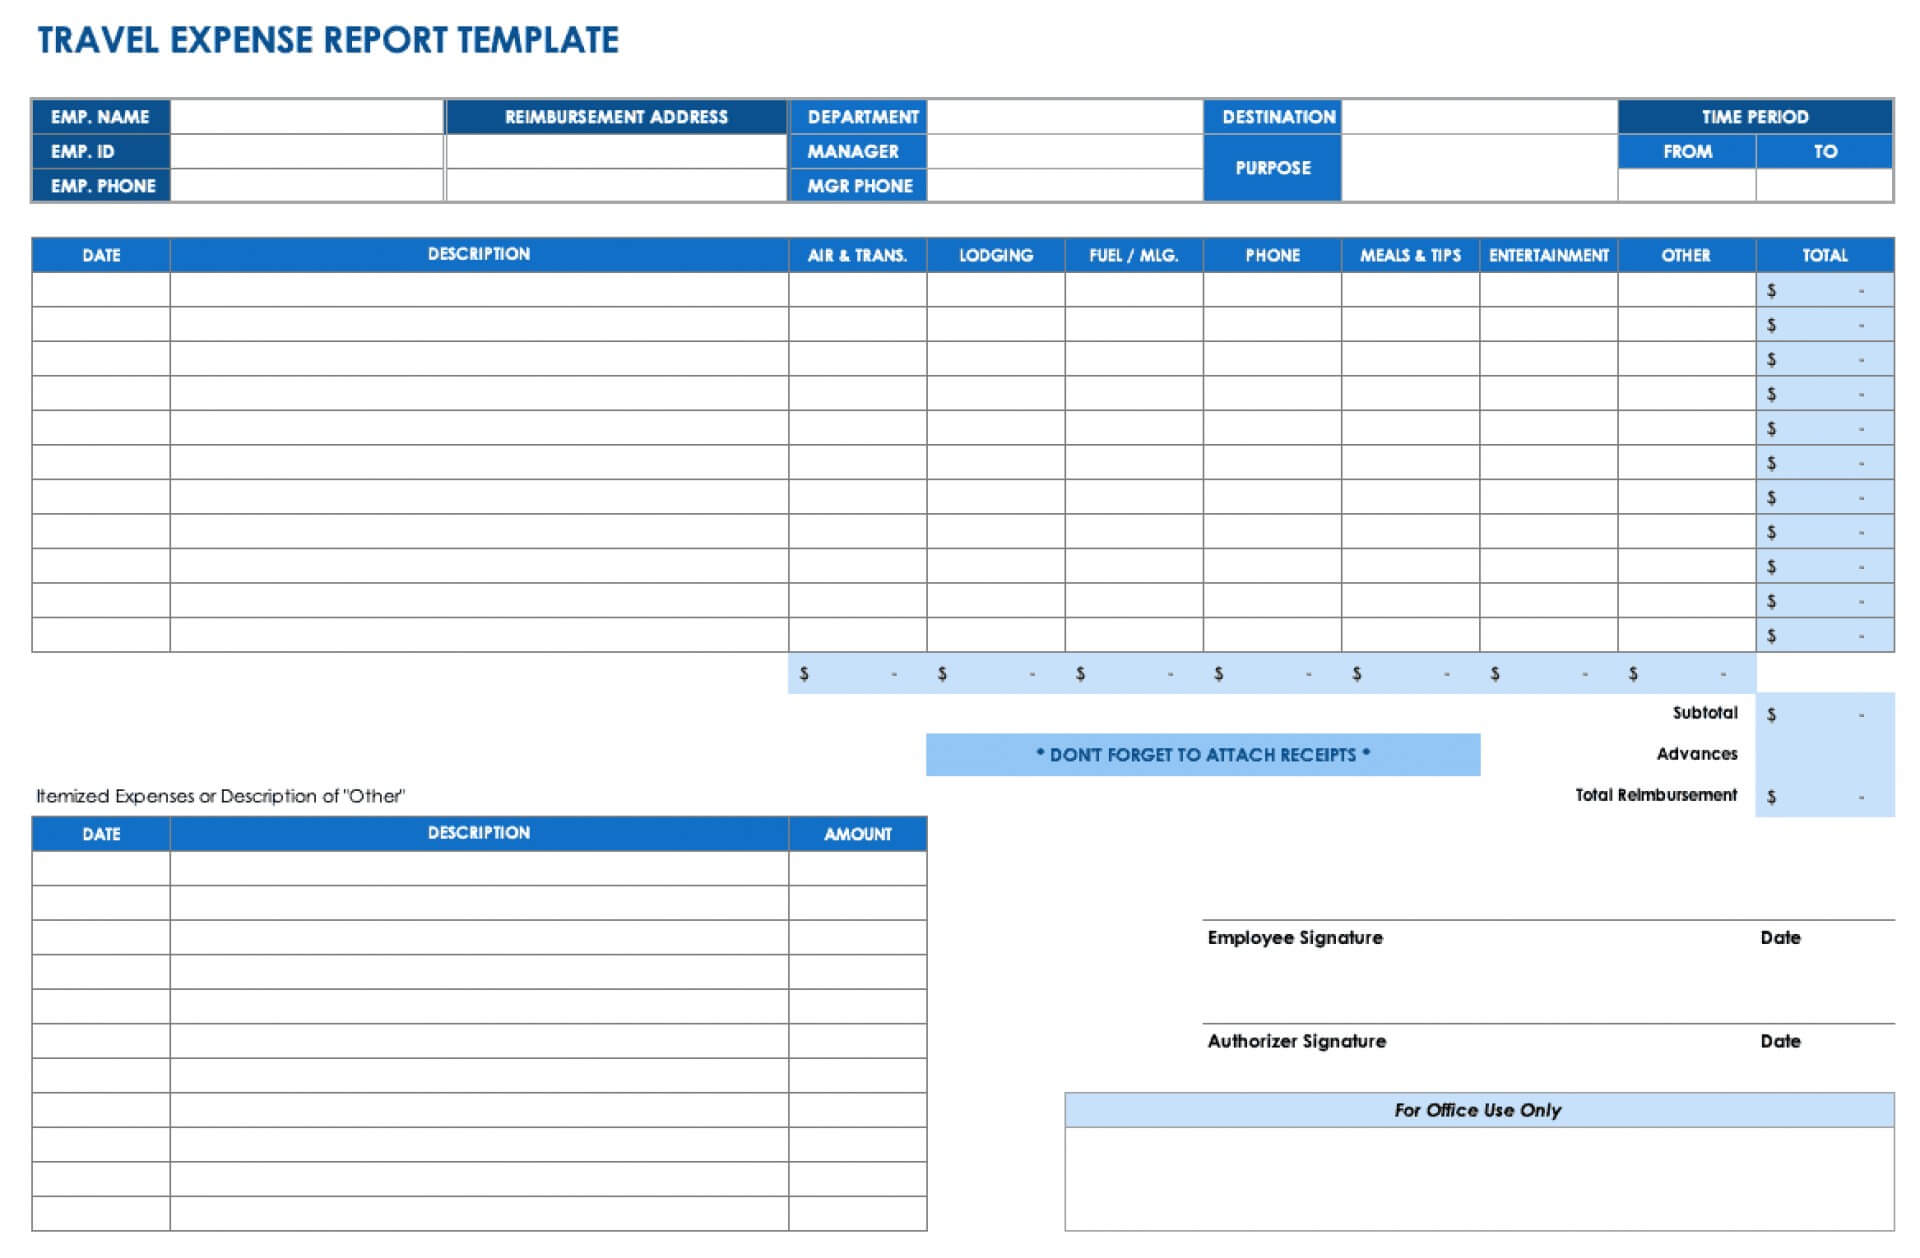 038 Construction Cost Report Template Excel Project Pertaining To Construction Cost Report Template